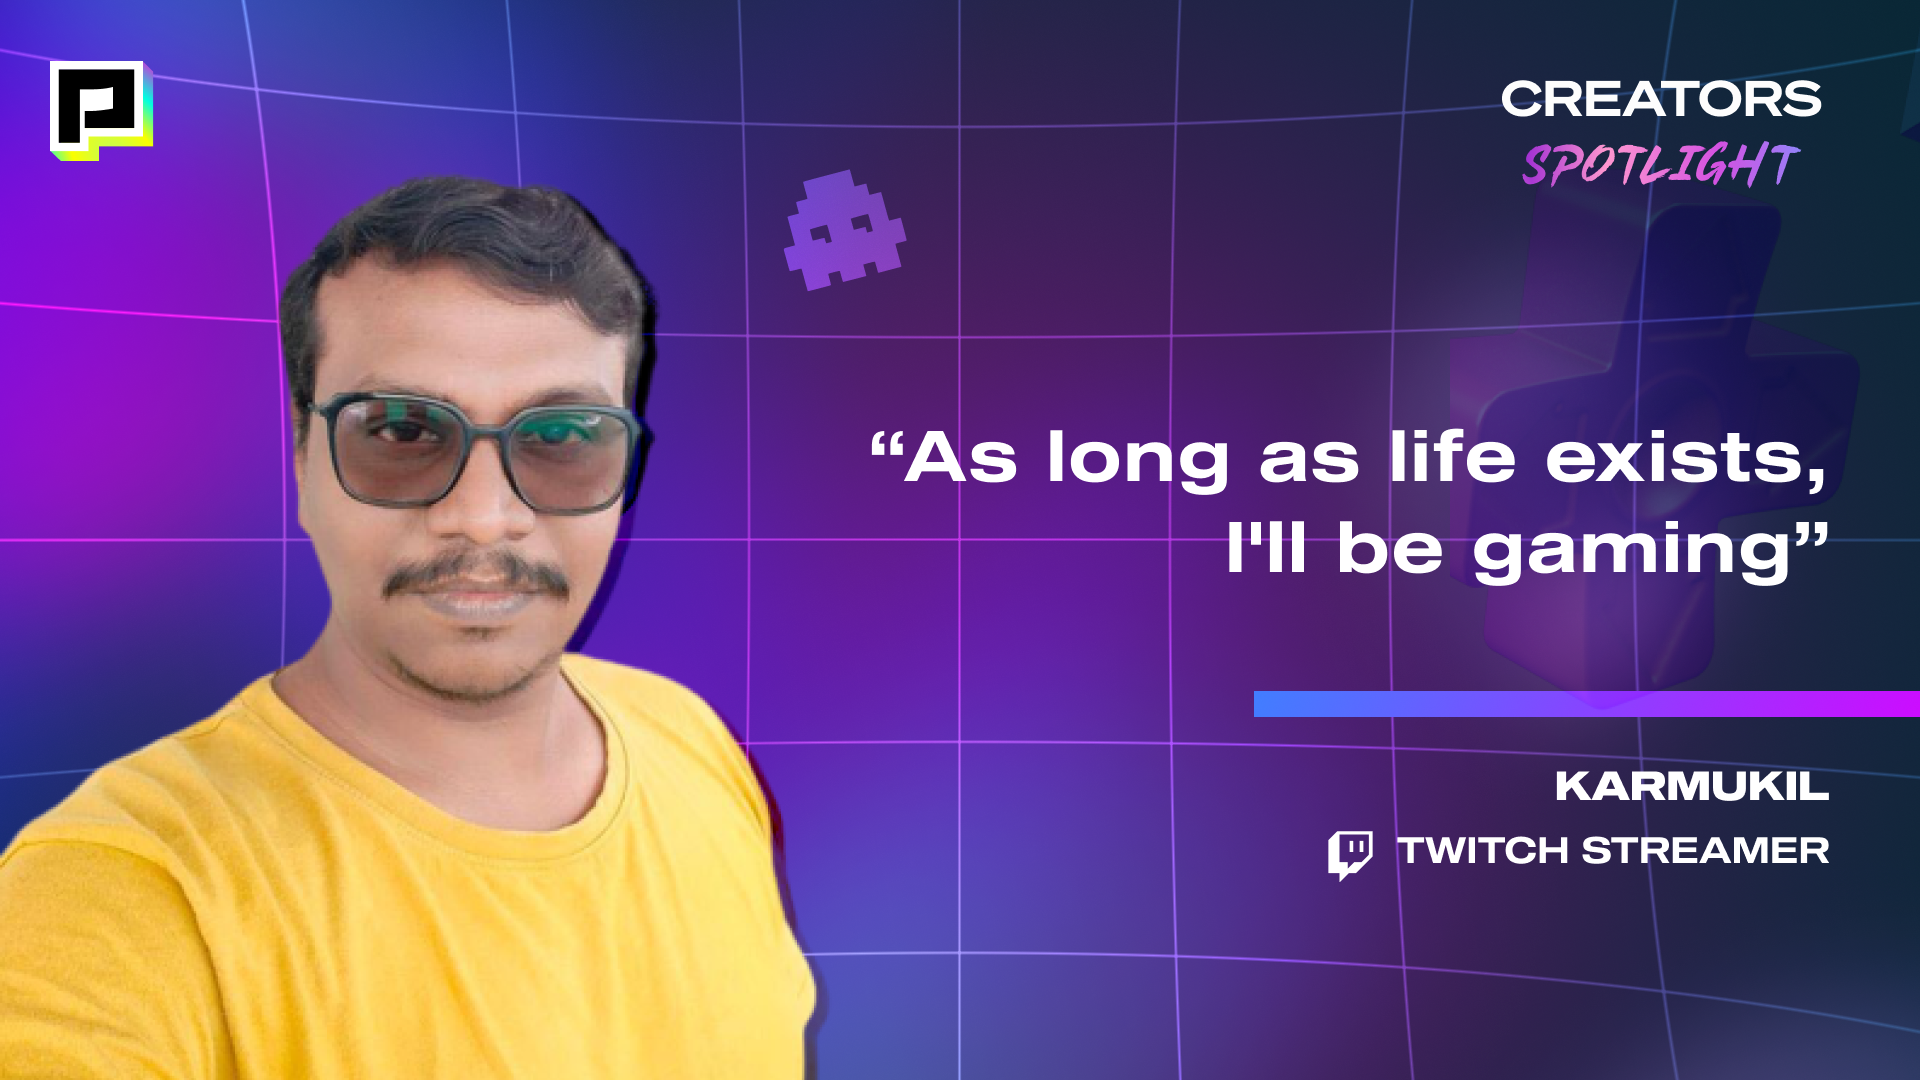 Image of Twitch Streamer, KARMUKIL with his quote, "As long as life exists, I'll be gaming"